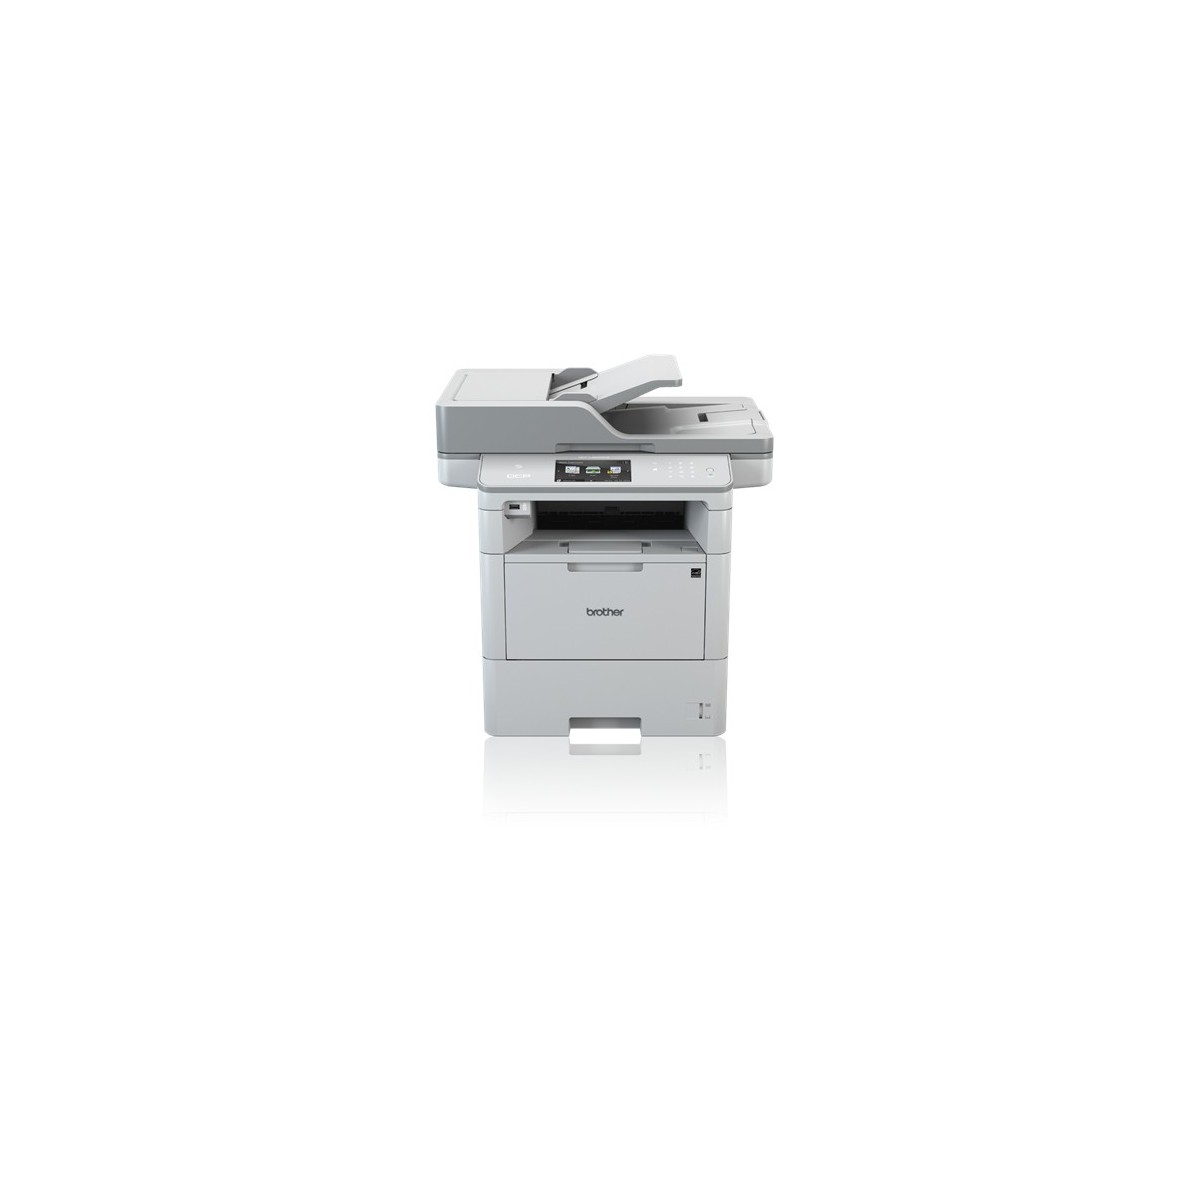 Brother DCP-L6600DW 3in1 Multifunktionsdrucker - Multifunction Printer - Laser/Led